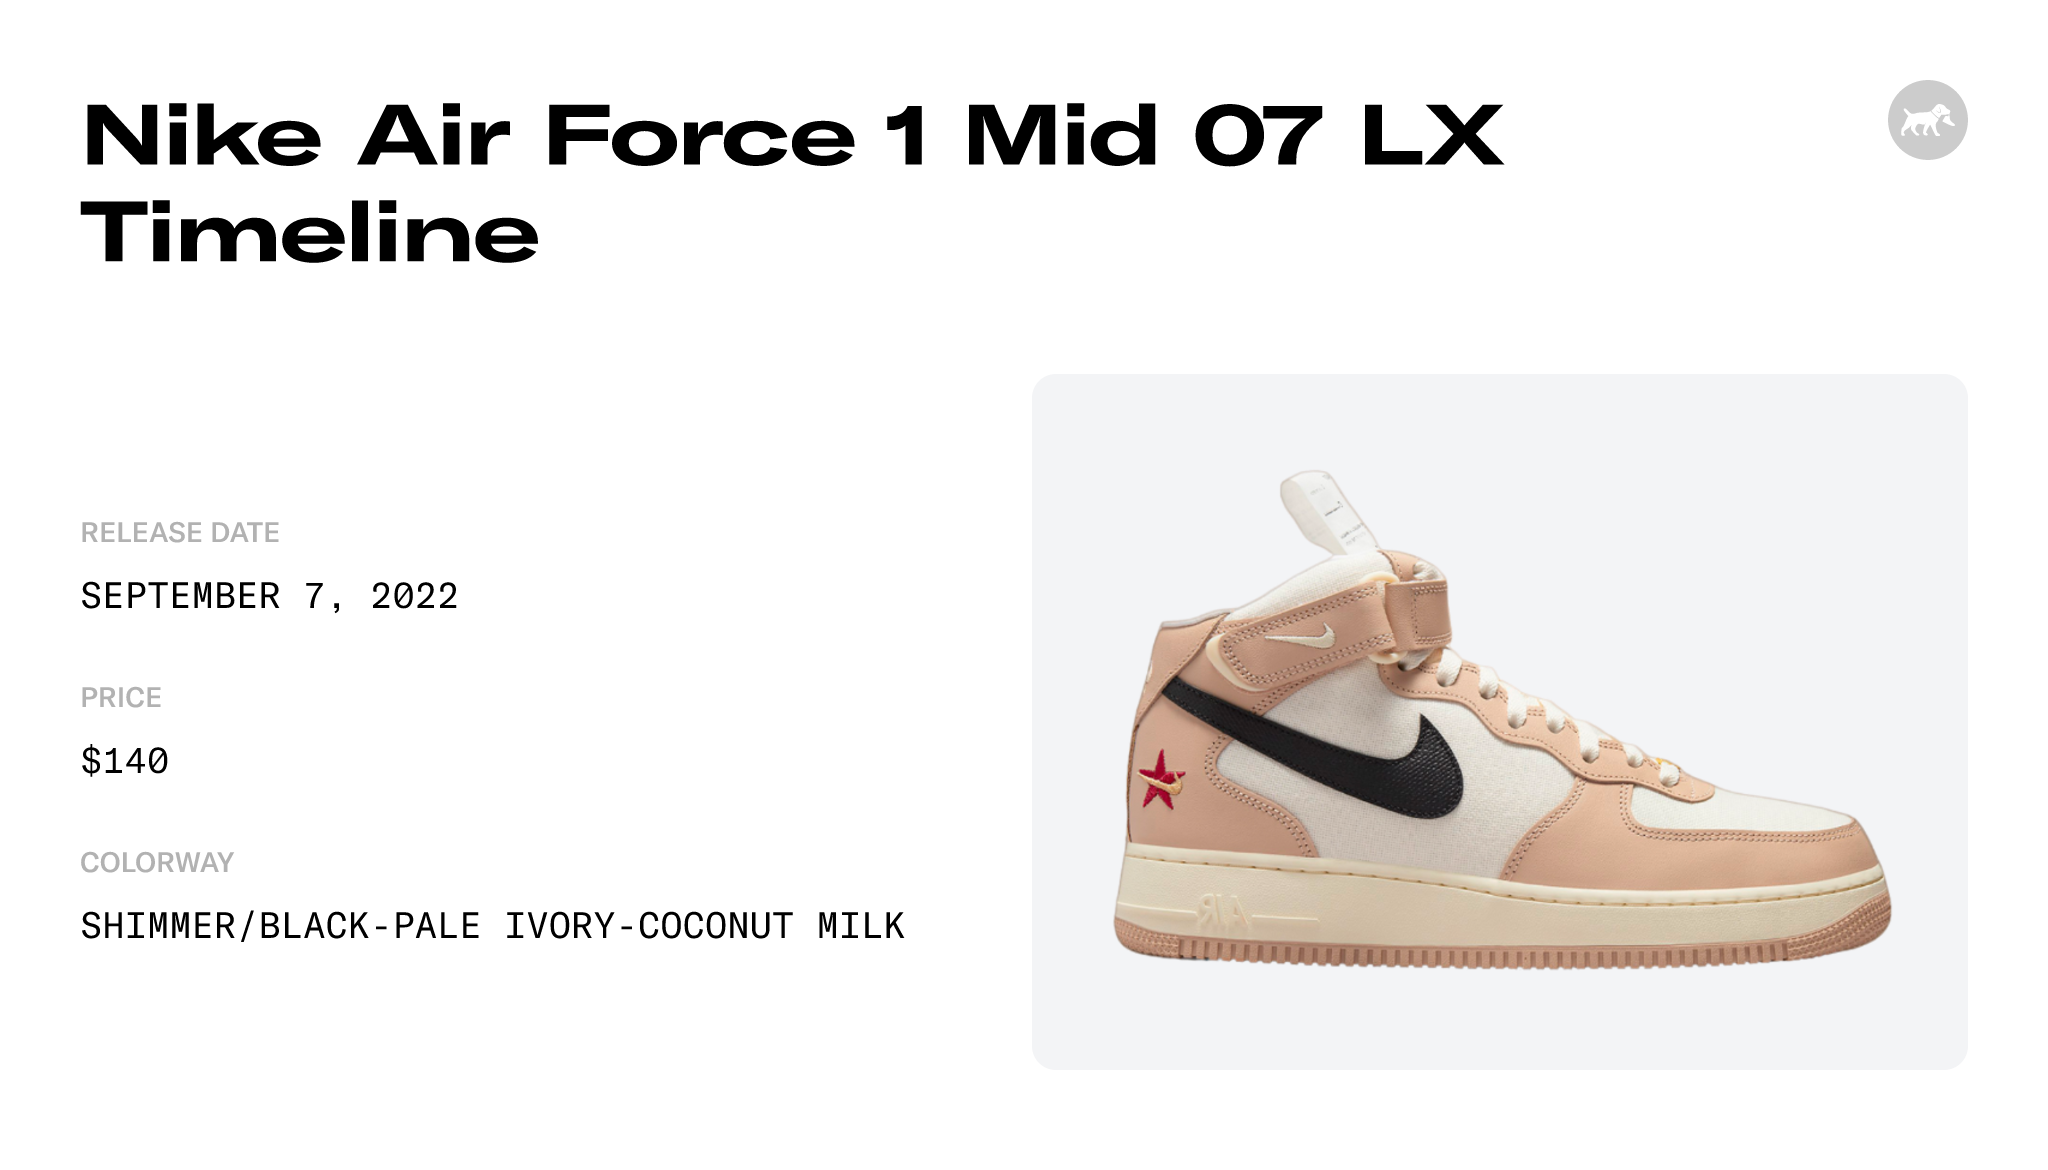 Nike Air Force 1 Mid '07 LV8 Next Nature Shoes in Grey - DM0119-100 Raffles  and Release Date